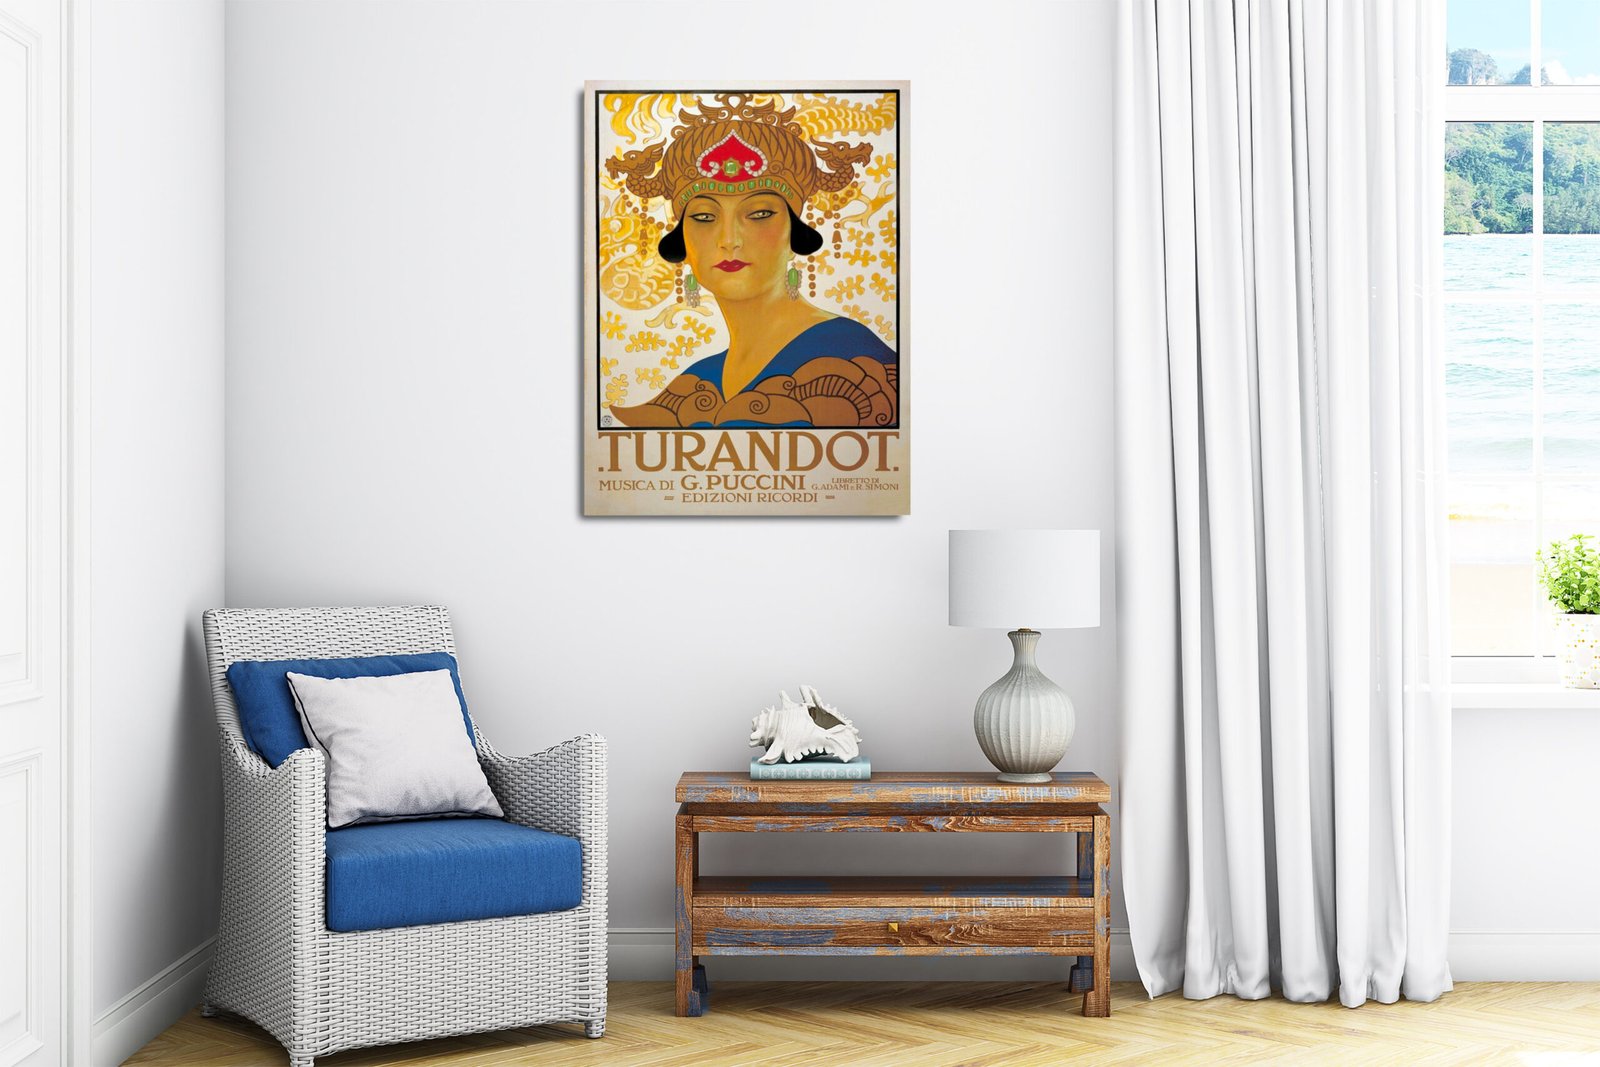 Vintage Downloadable Posters: Affordable and Stylish Home Decor